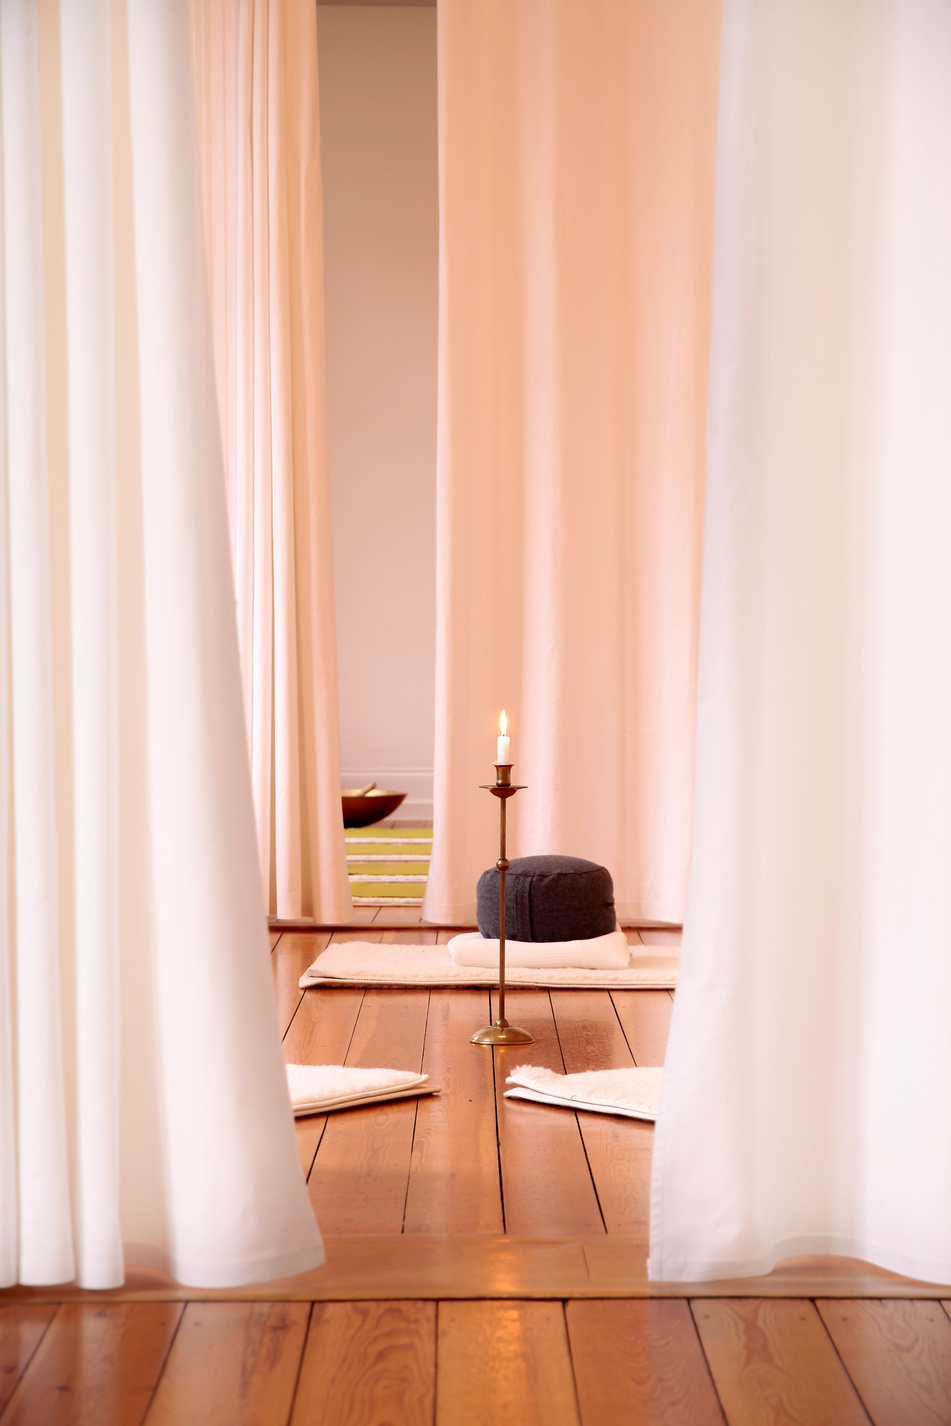 Meditation room with white curtains